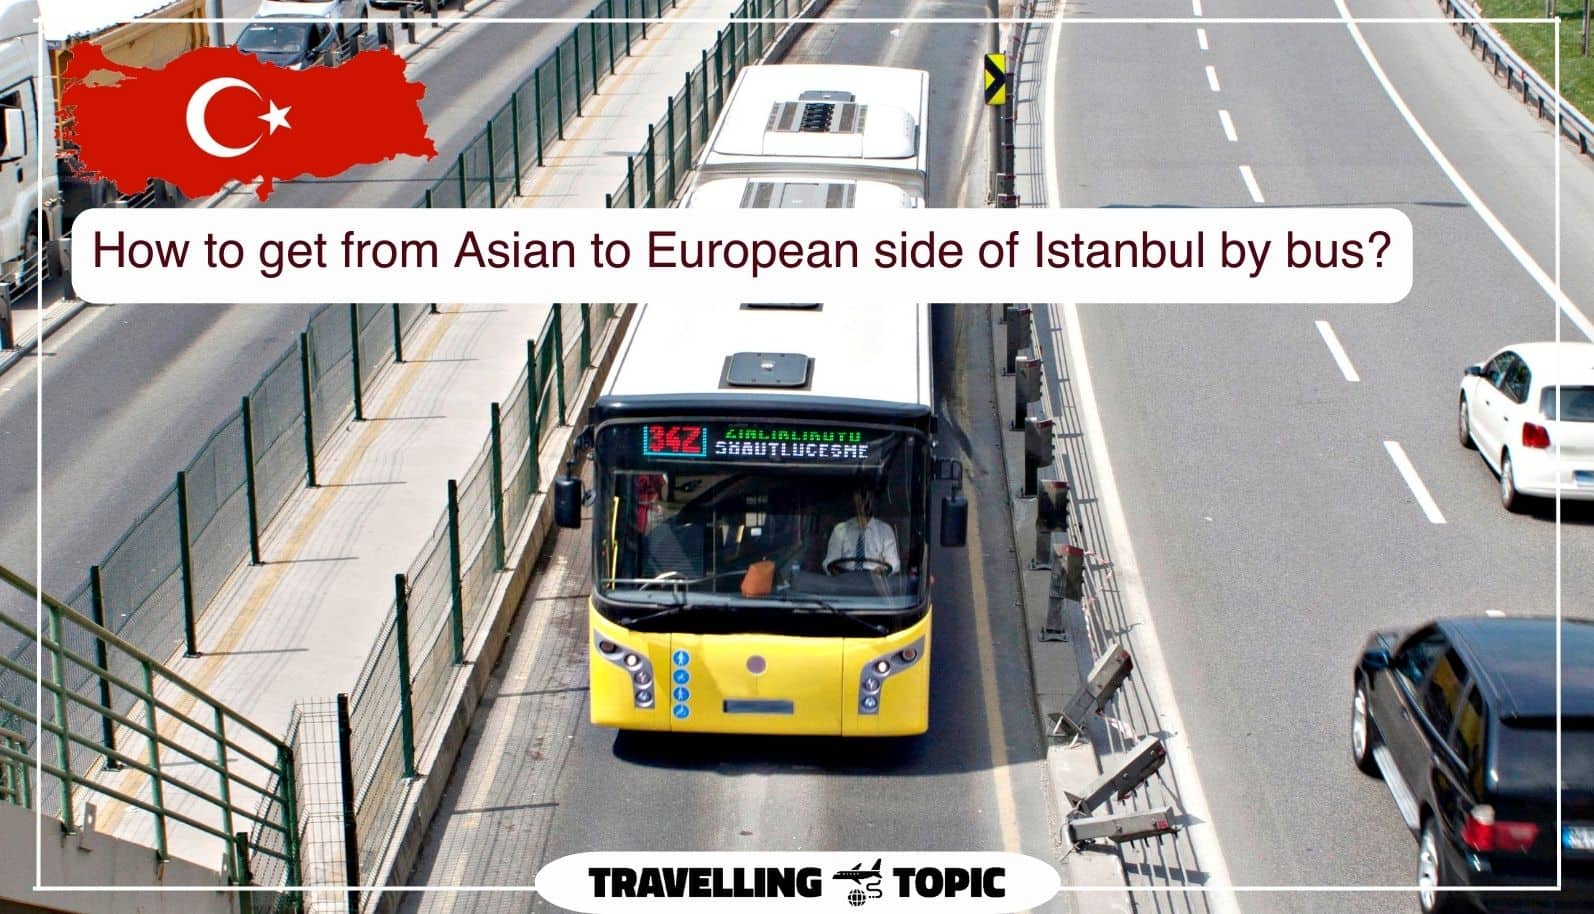 How to get from Asian to European side of Istanbul by bus?